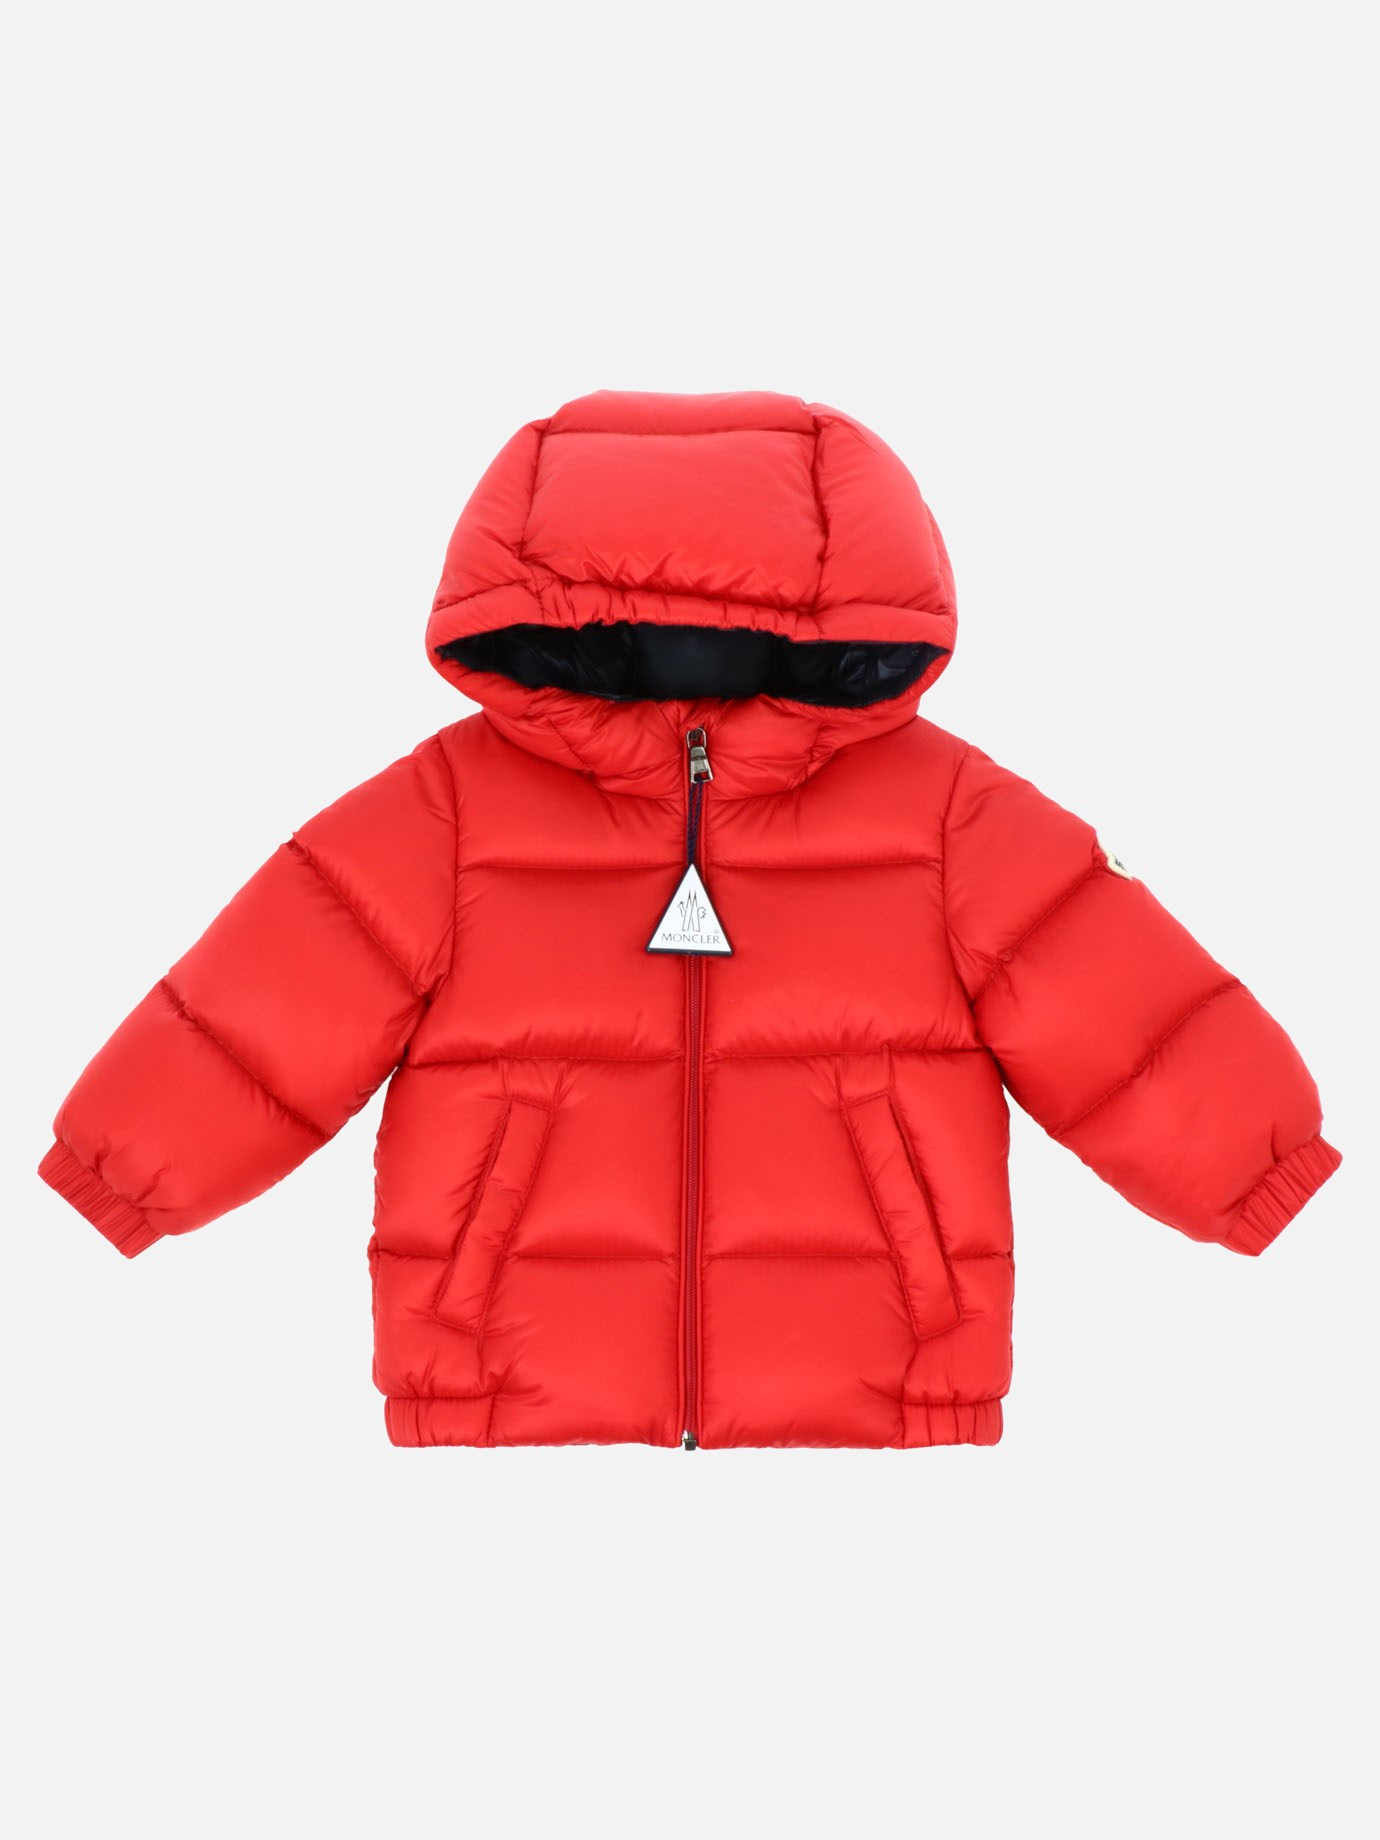  New Macaire  down jacketby Moncler Enfant - 0